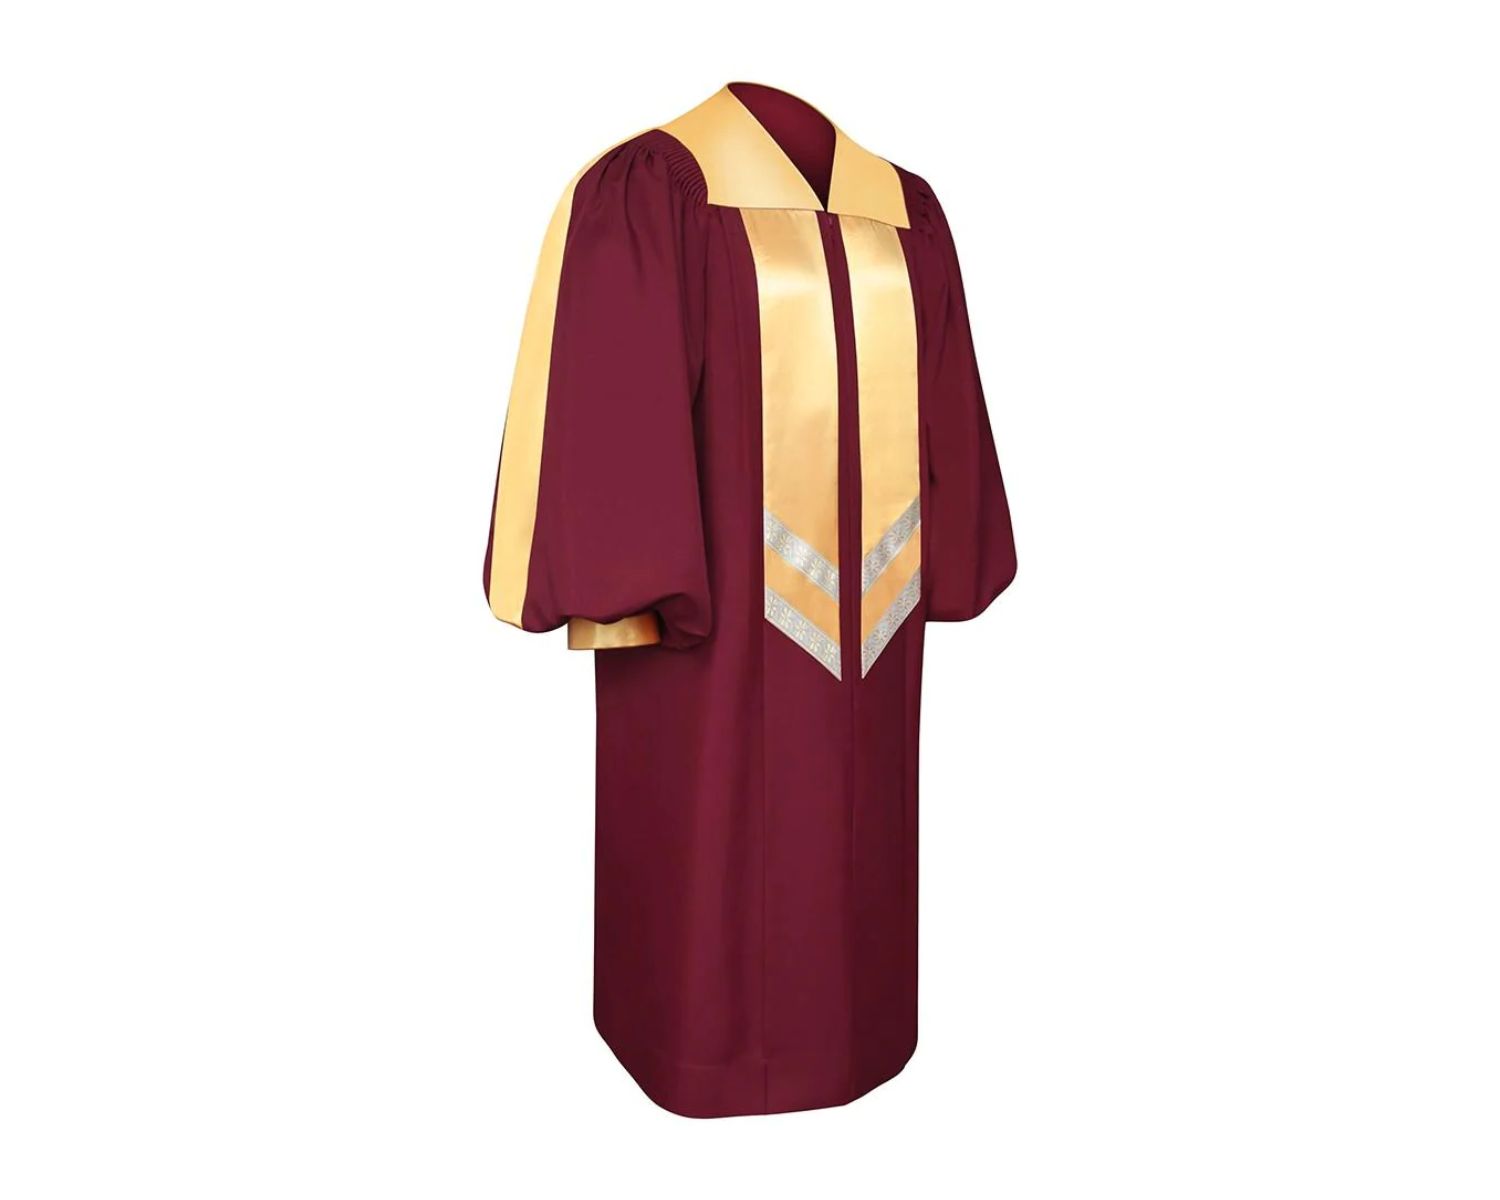 Choir Robes: A Stylish and Functional Choice for Him